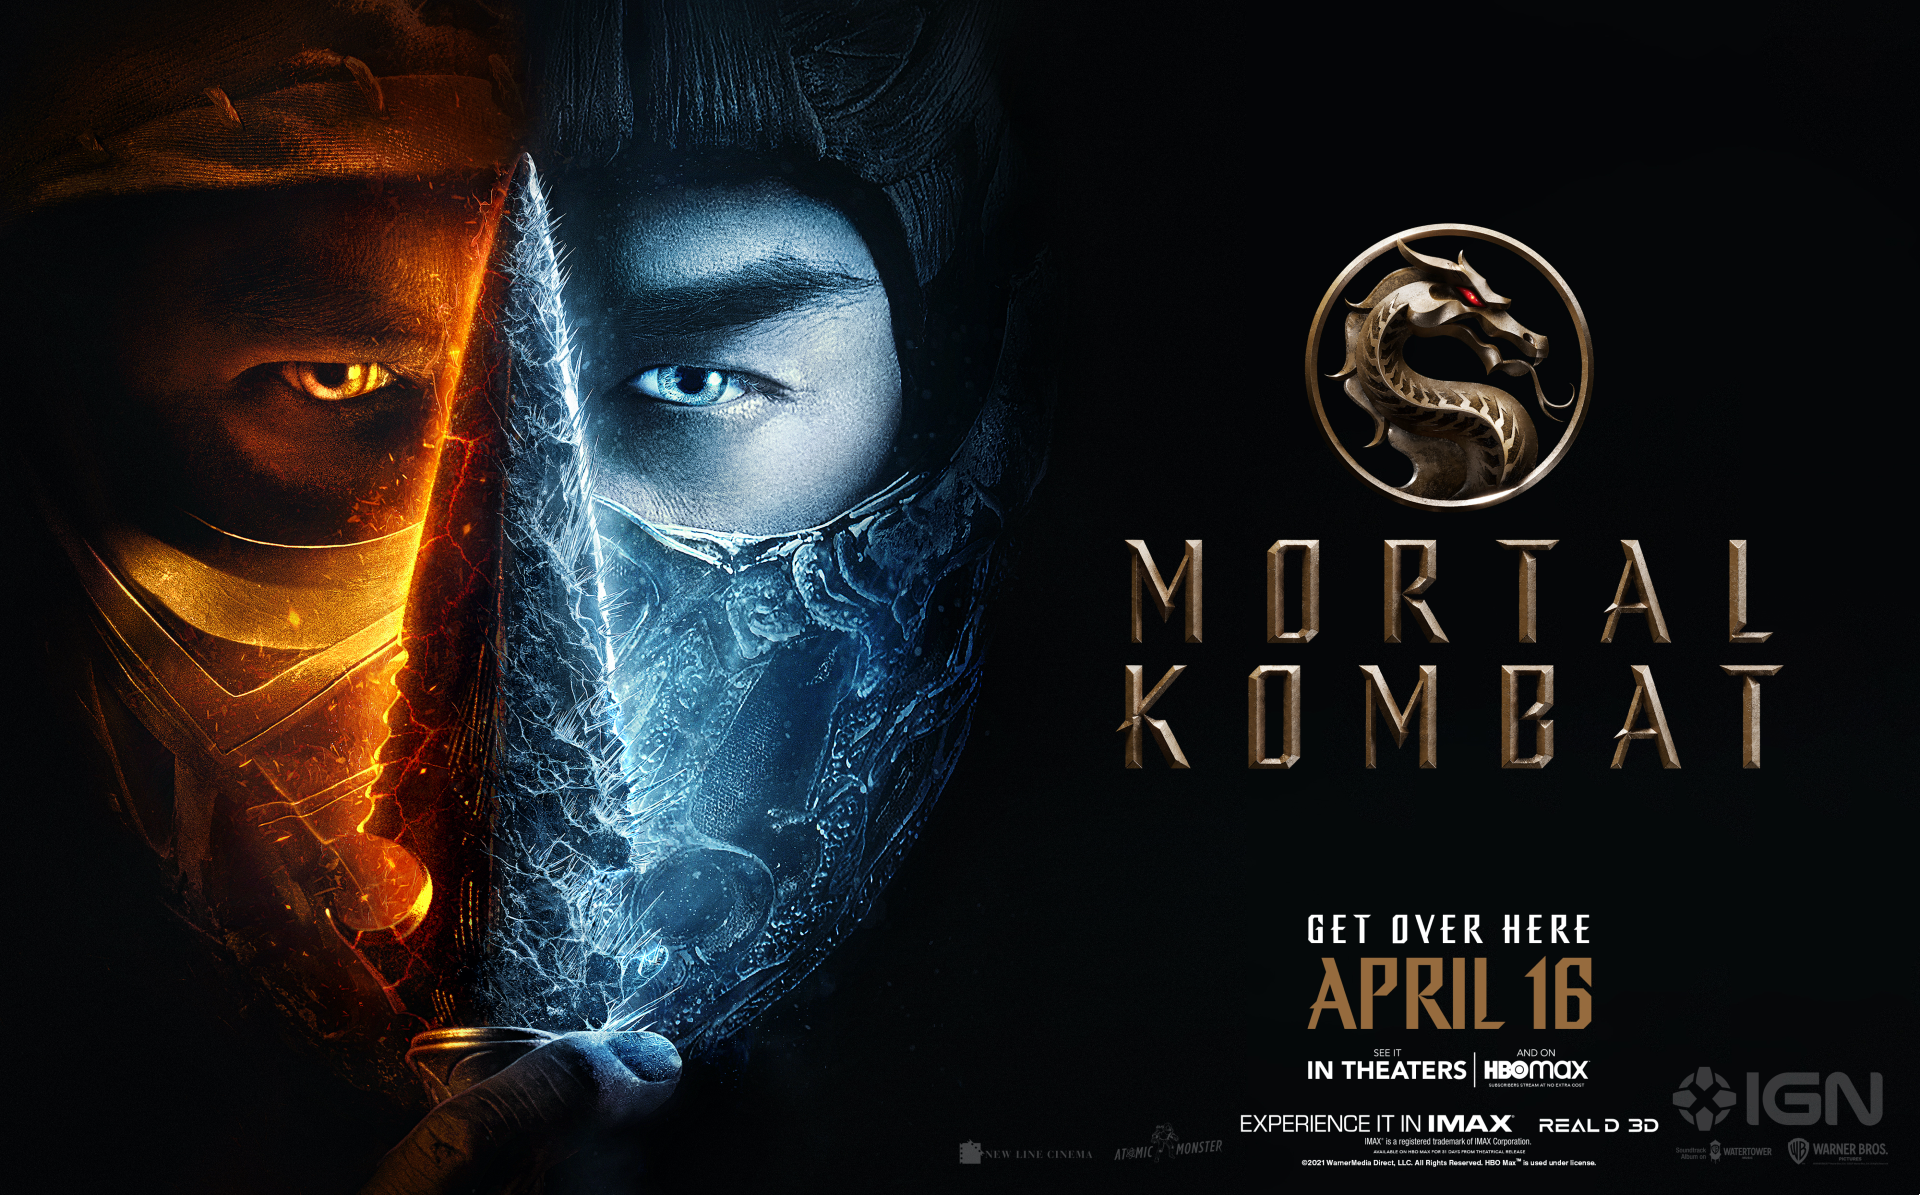 First Look: Mortal Kombat Movie Poster Featuring Sub Zero And Scorpion